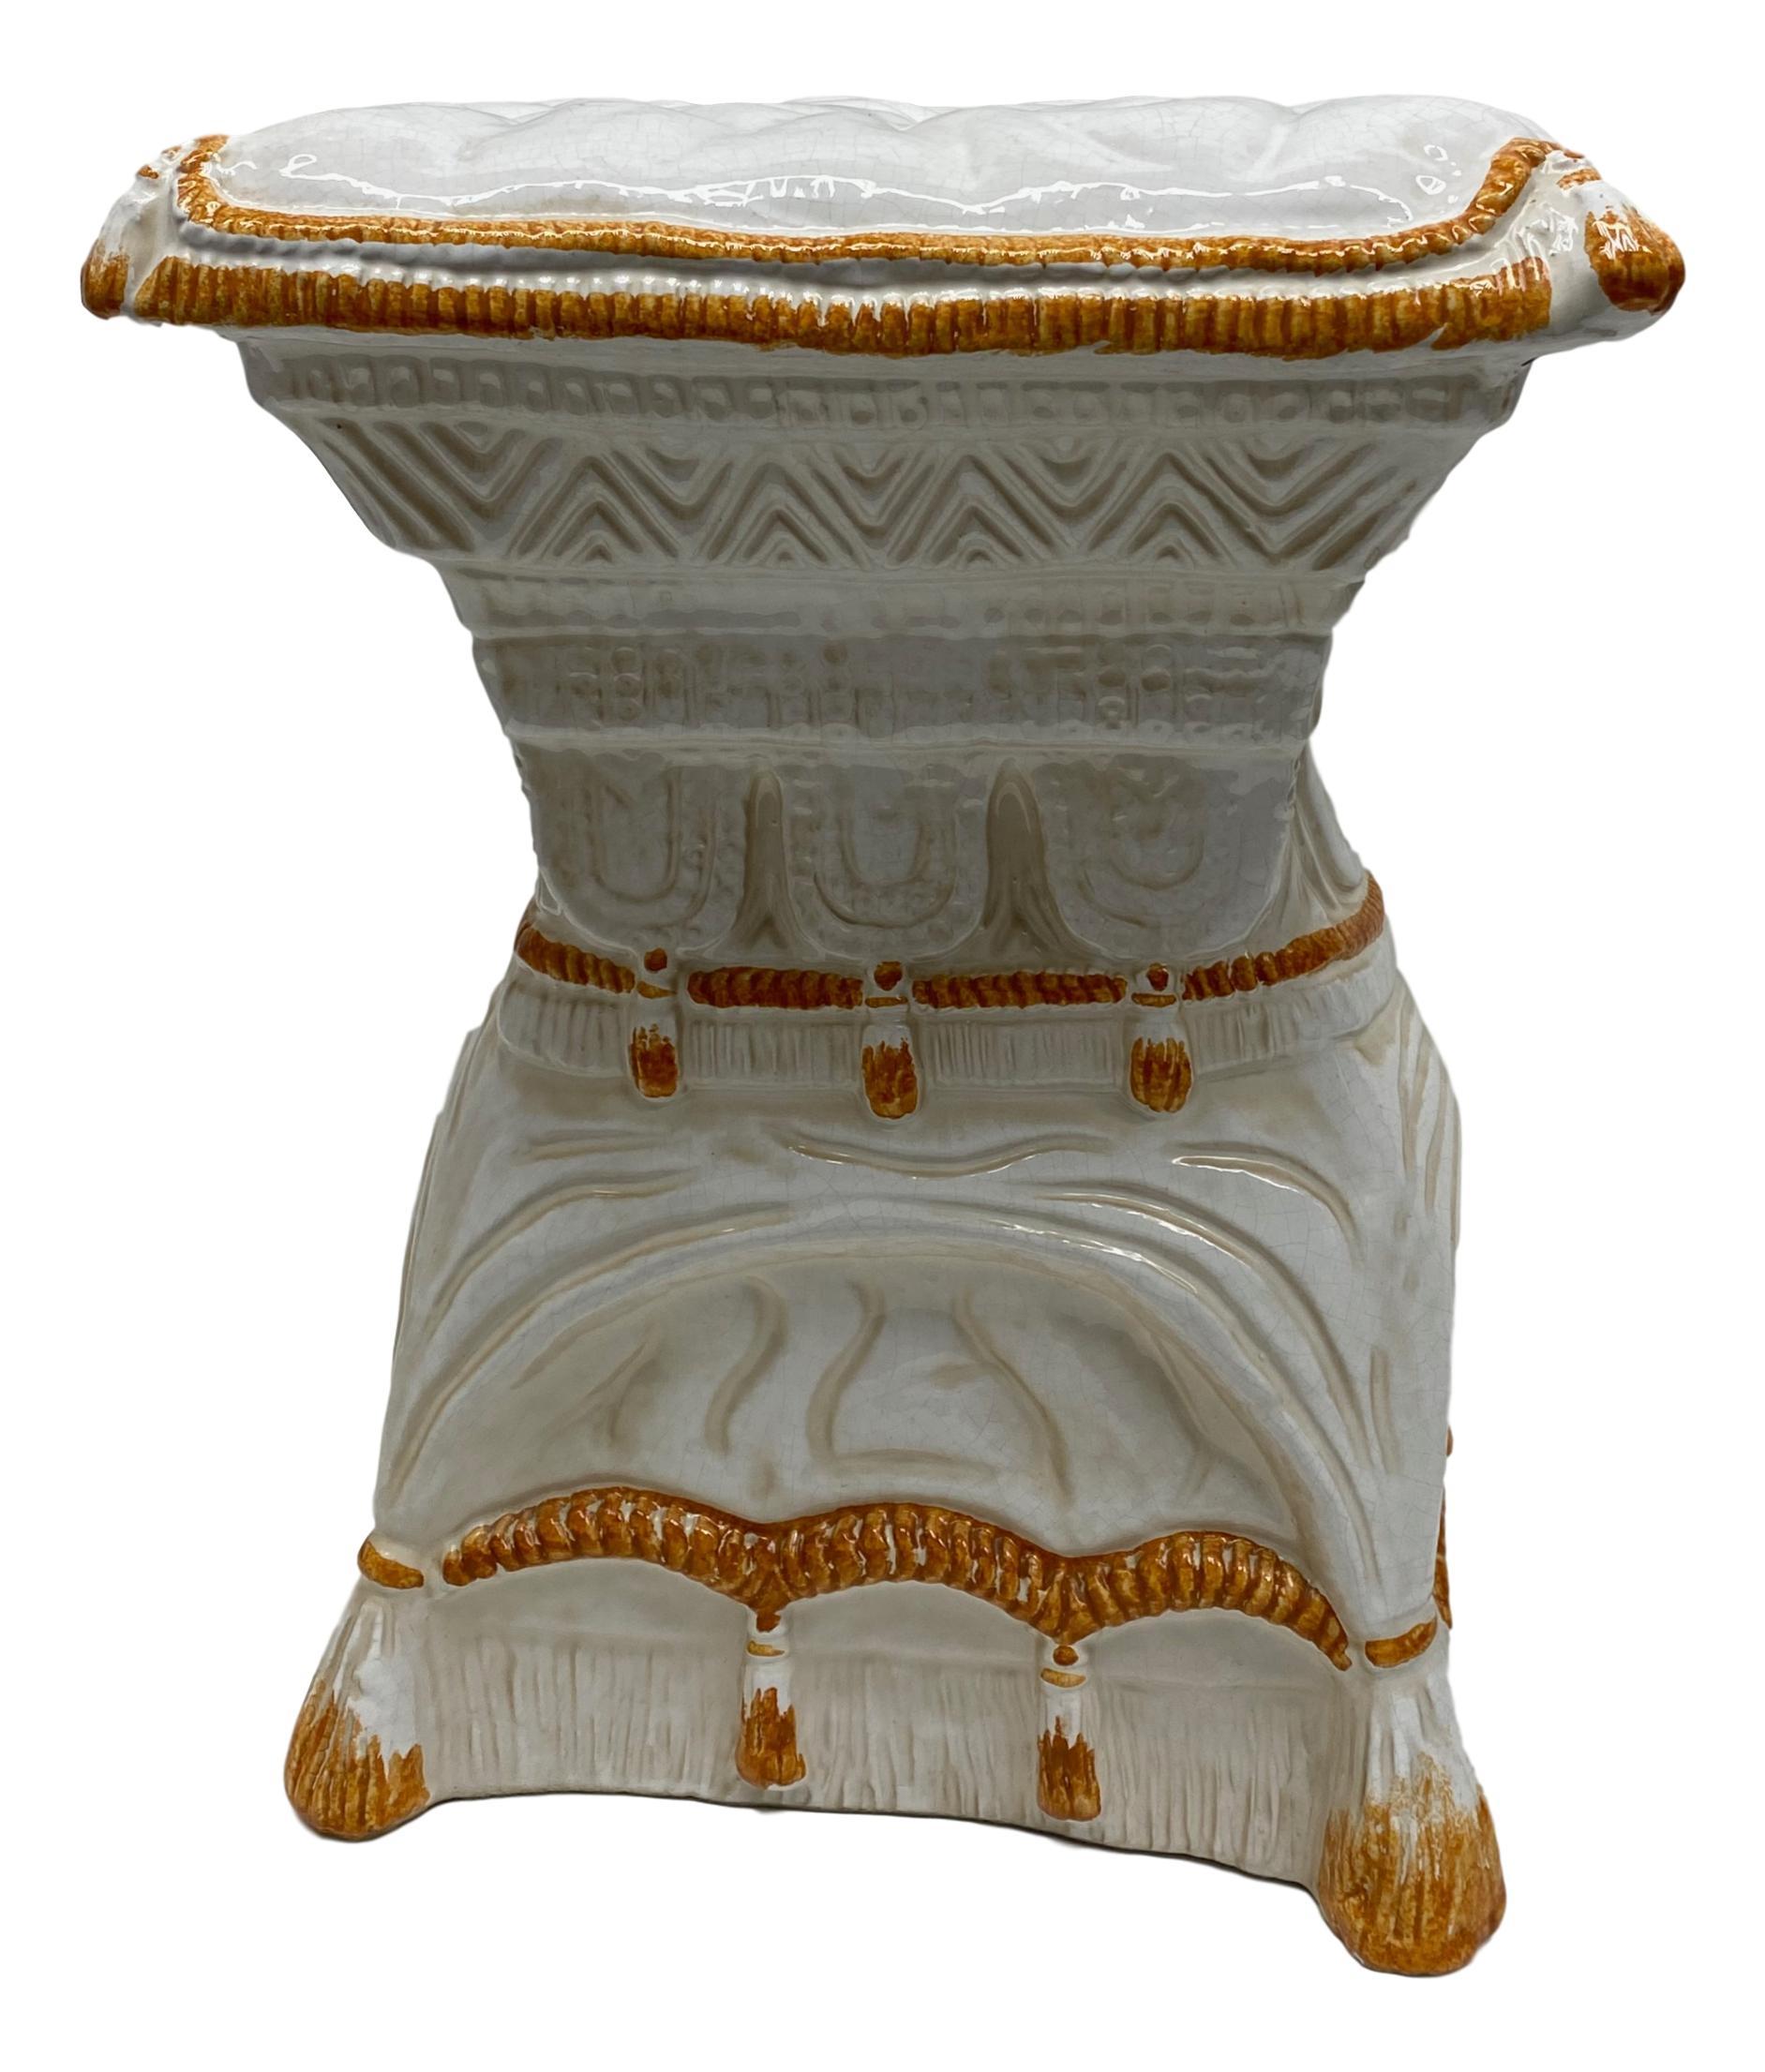 Mid-20th century glazed terracotta garden stool plant stand or seat, flower pot seat or side table. Handmade of  terracotta. Nice addition to your home, patio or garden. This is in used condition, with signs of wear as expected with age and use.